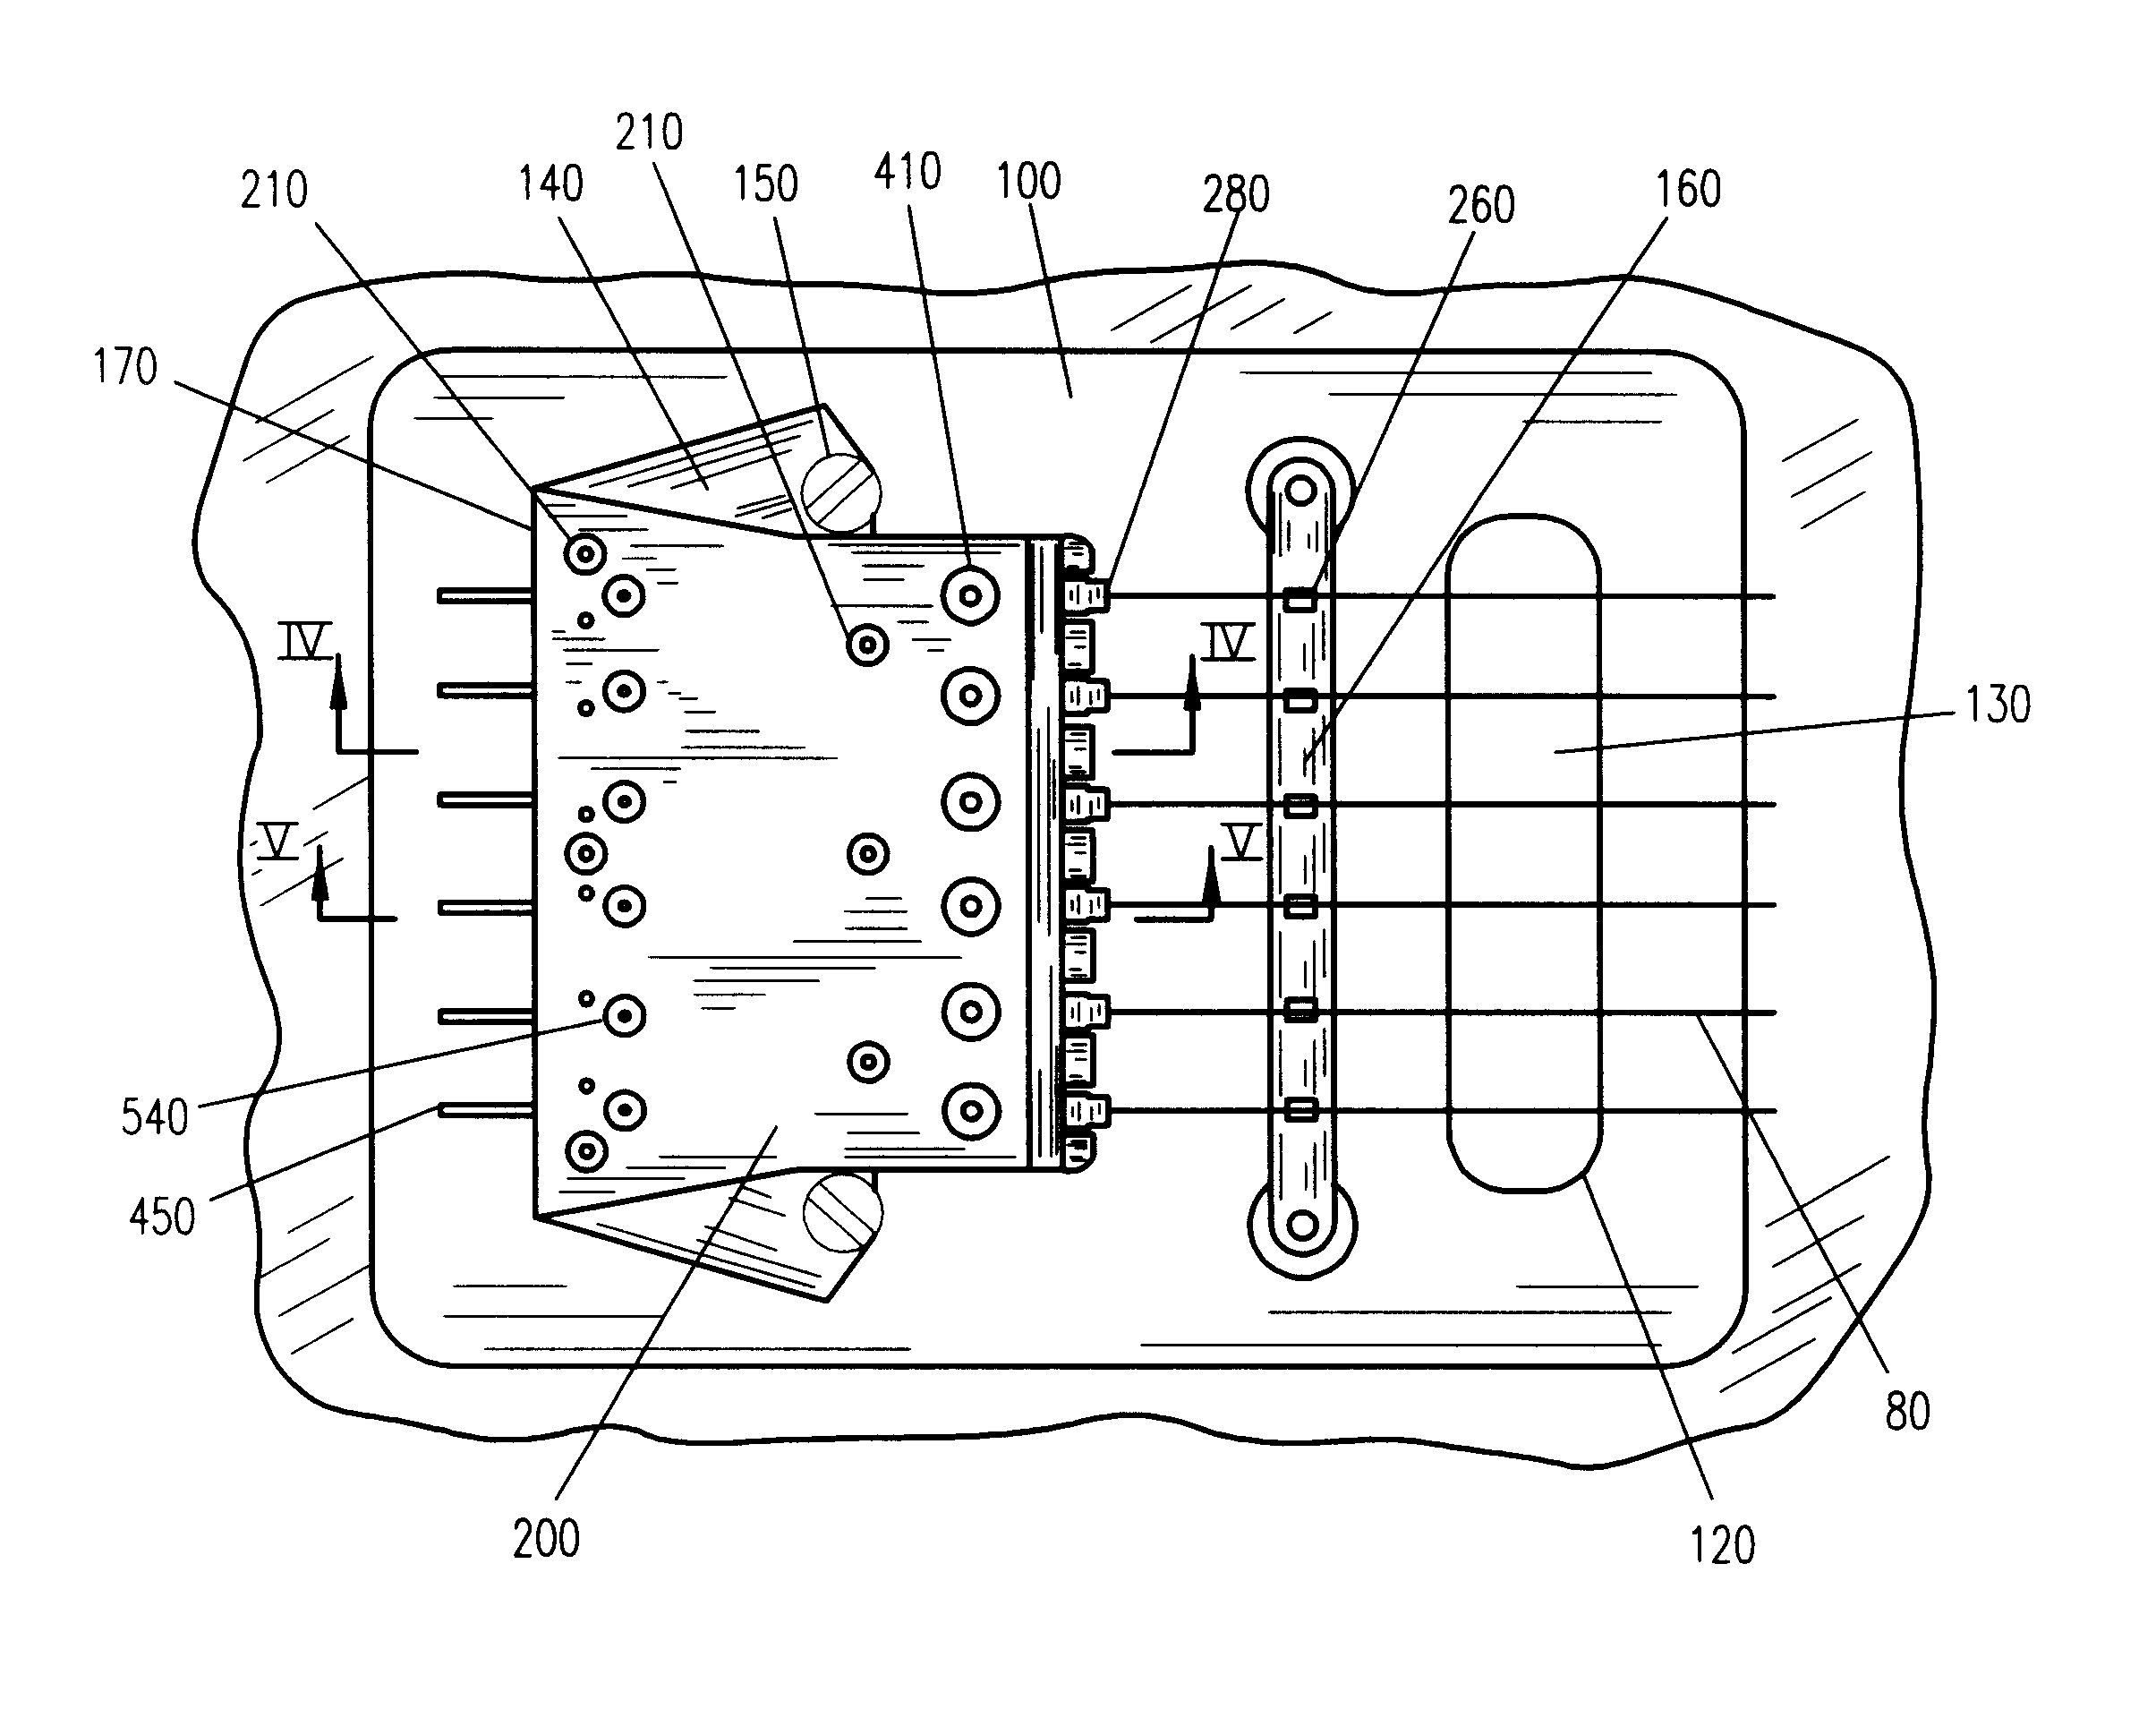 Universal, multi-position, tuning mechanism and bridge for stringed musical instruments